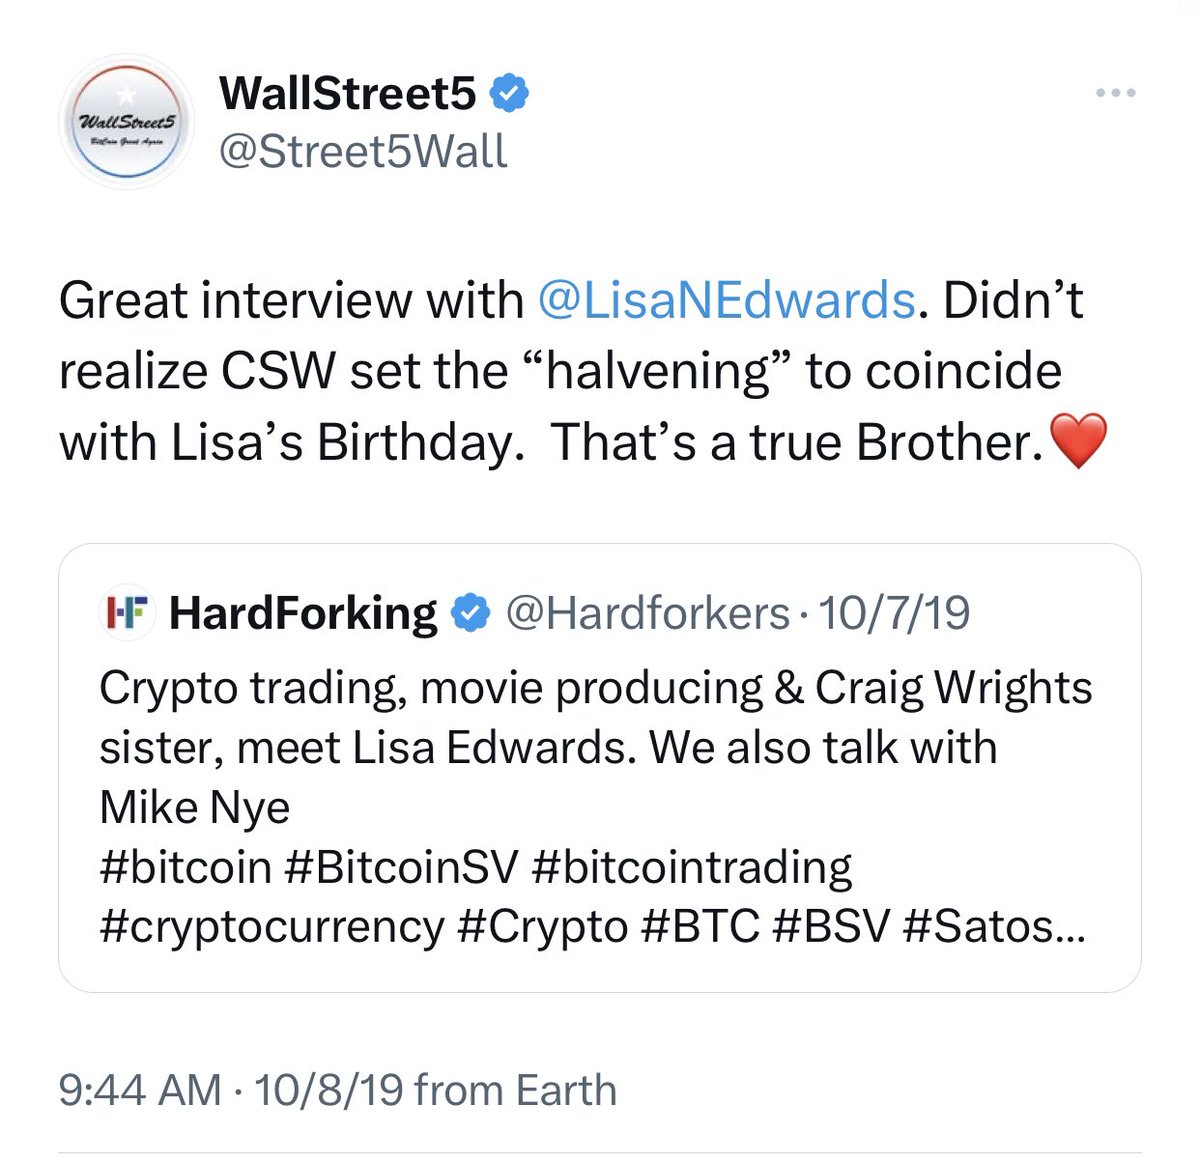 Bitcoin's fourth halving approaches, with just a few hours to go! While we wait, I would like to take this opportunity to wish Faketoshi's sister, @LisaNEdwards, a happy birthday.